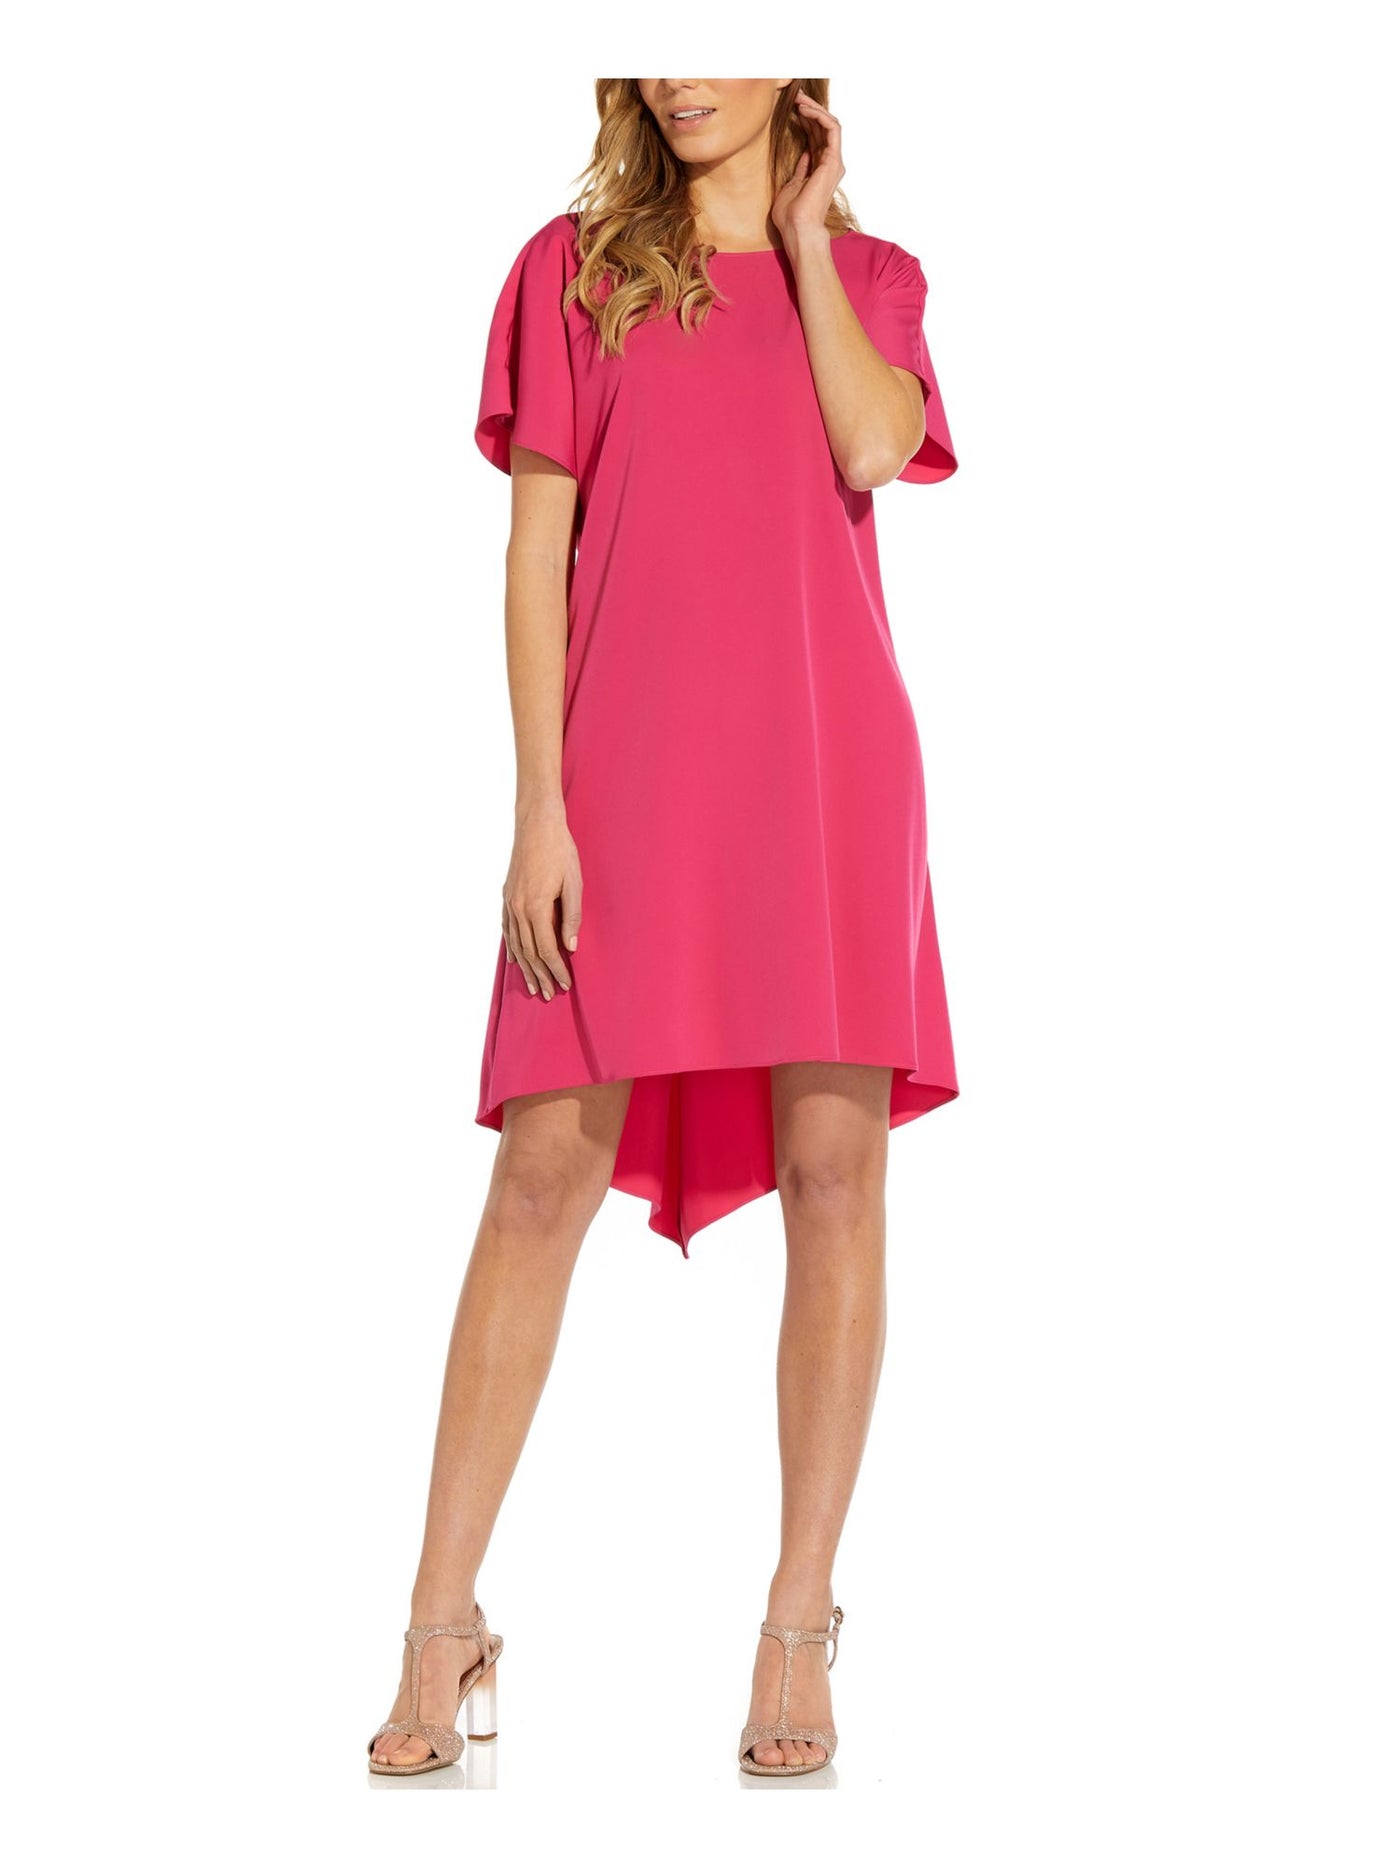 ADRIANNA PAPELL Womens Pink Short Sleeve Boat Neck Below The Knee Evening Hi-Lo Dress 2